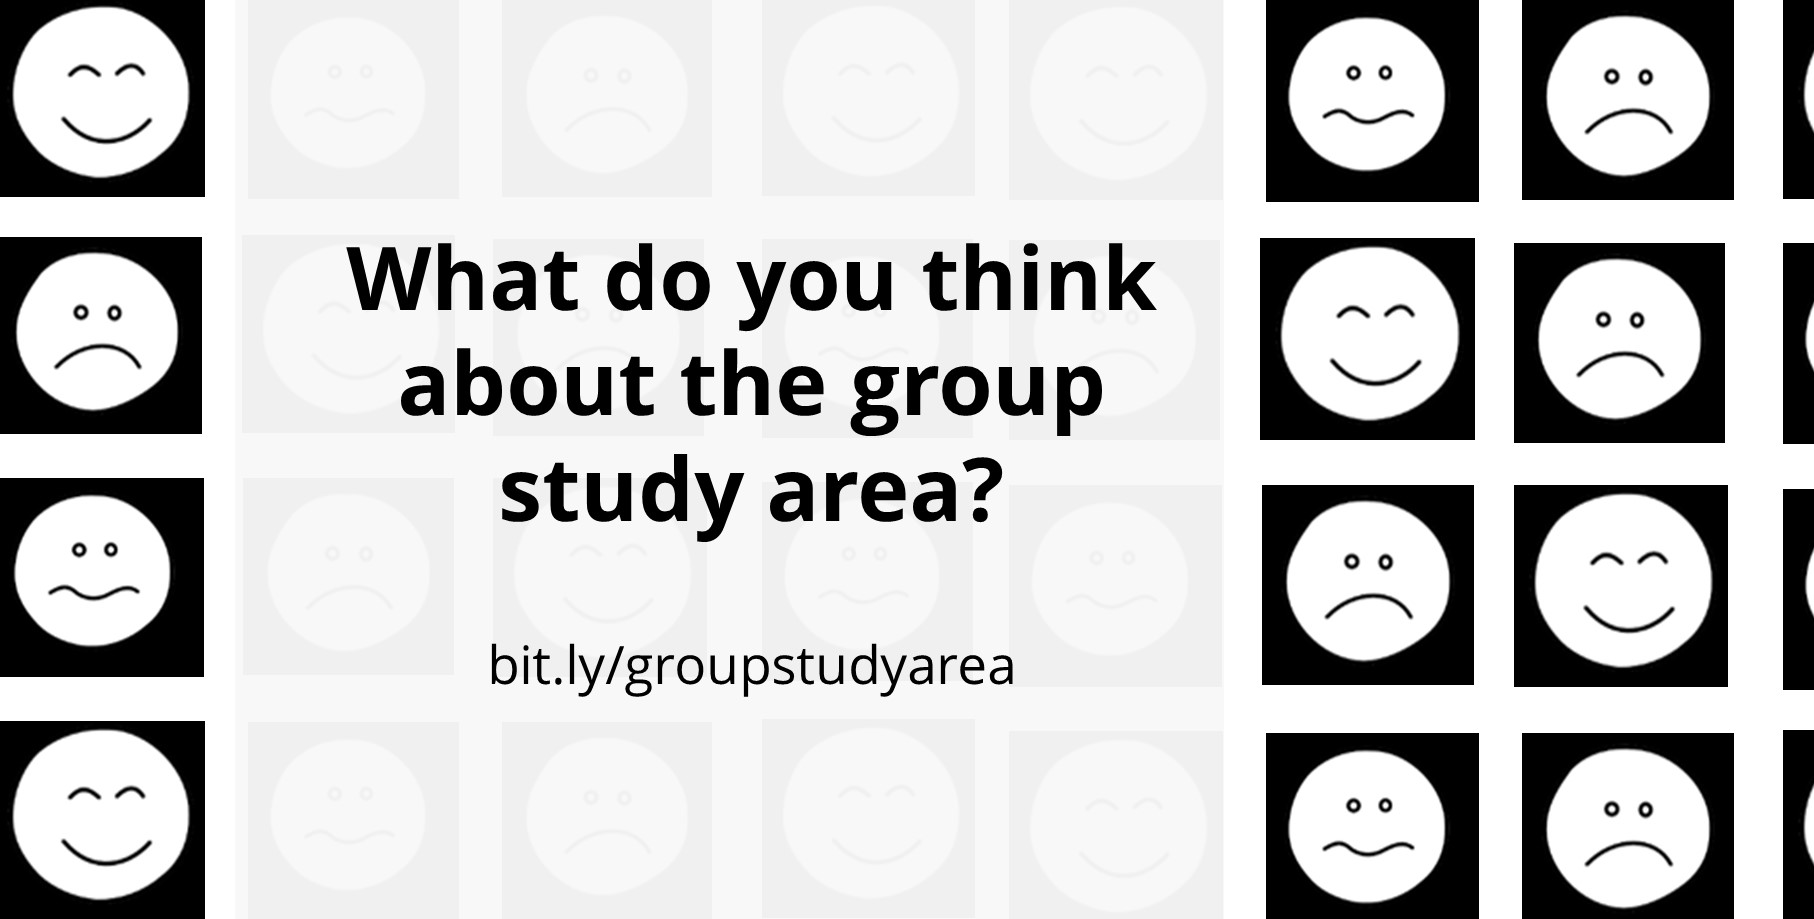 What do you think of the group study area?